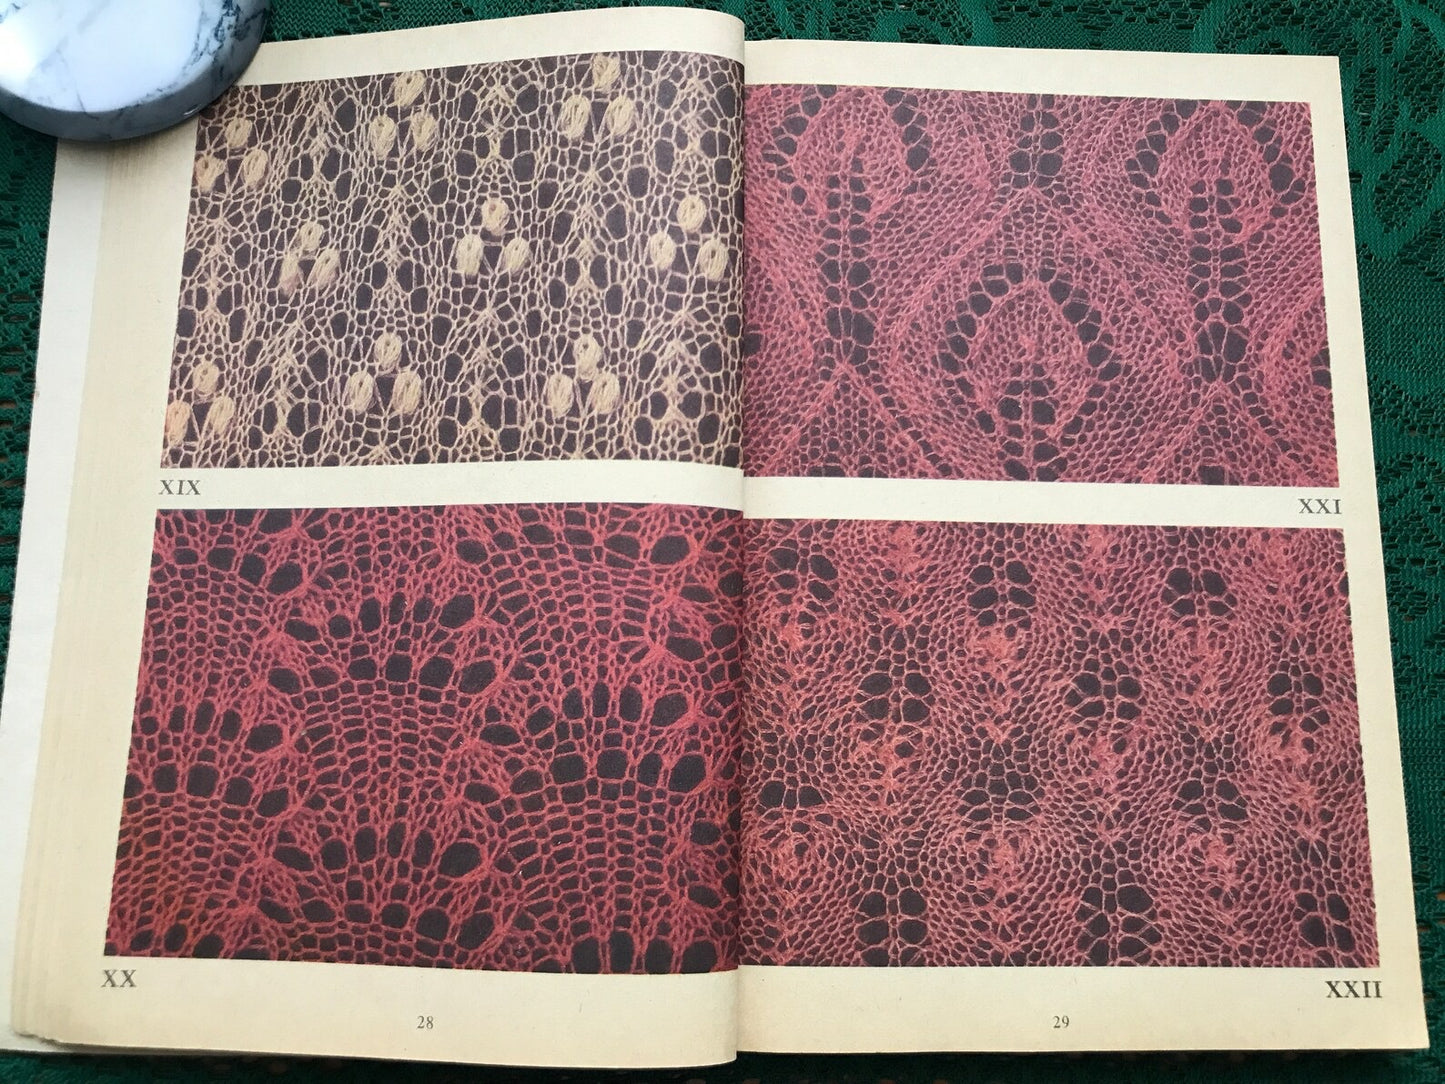 Vintage Estonian Crafts book - Lace making knitting manual, techniques and patterns - Printed in 1970s